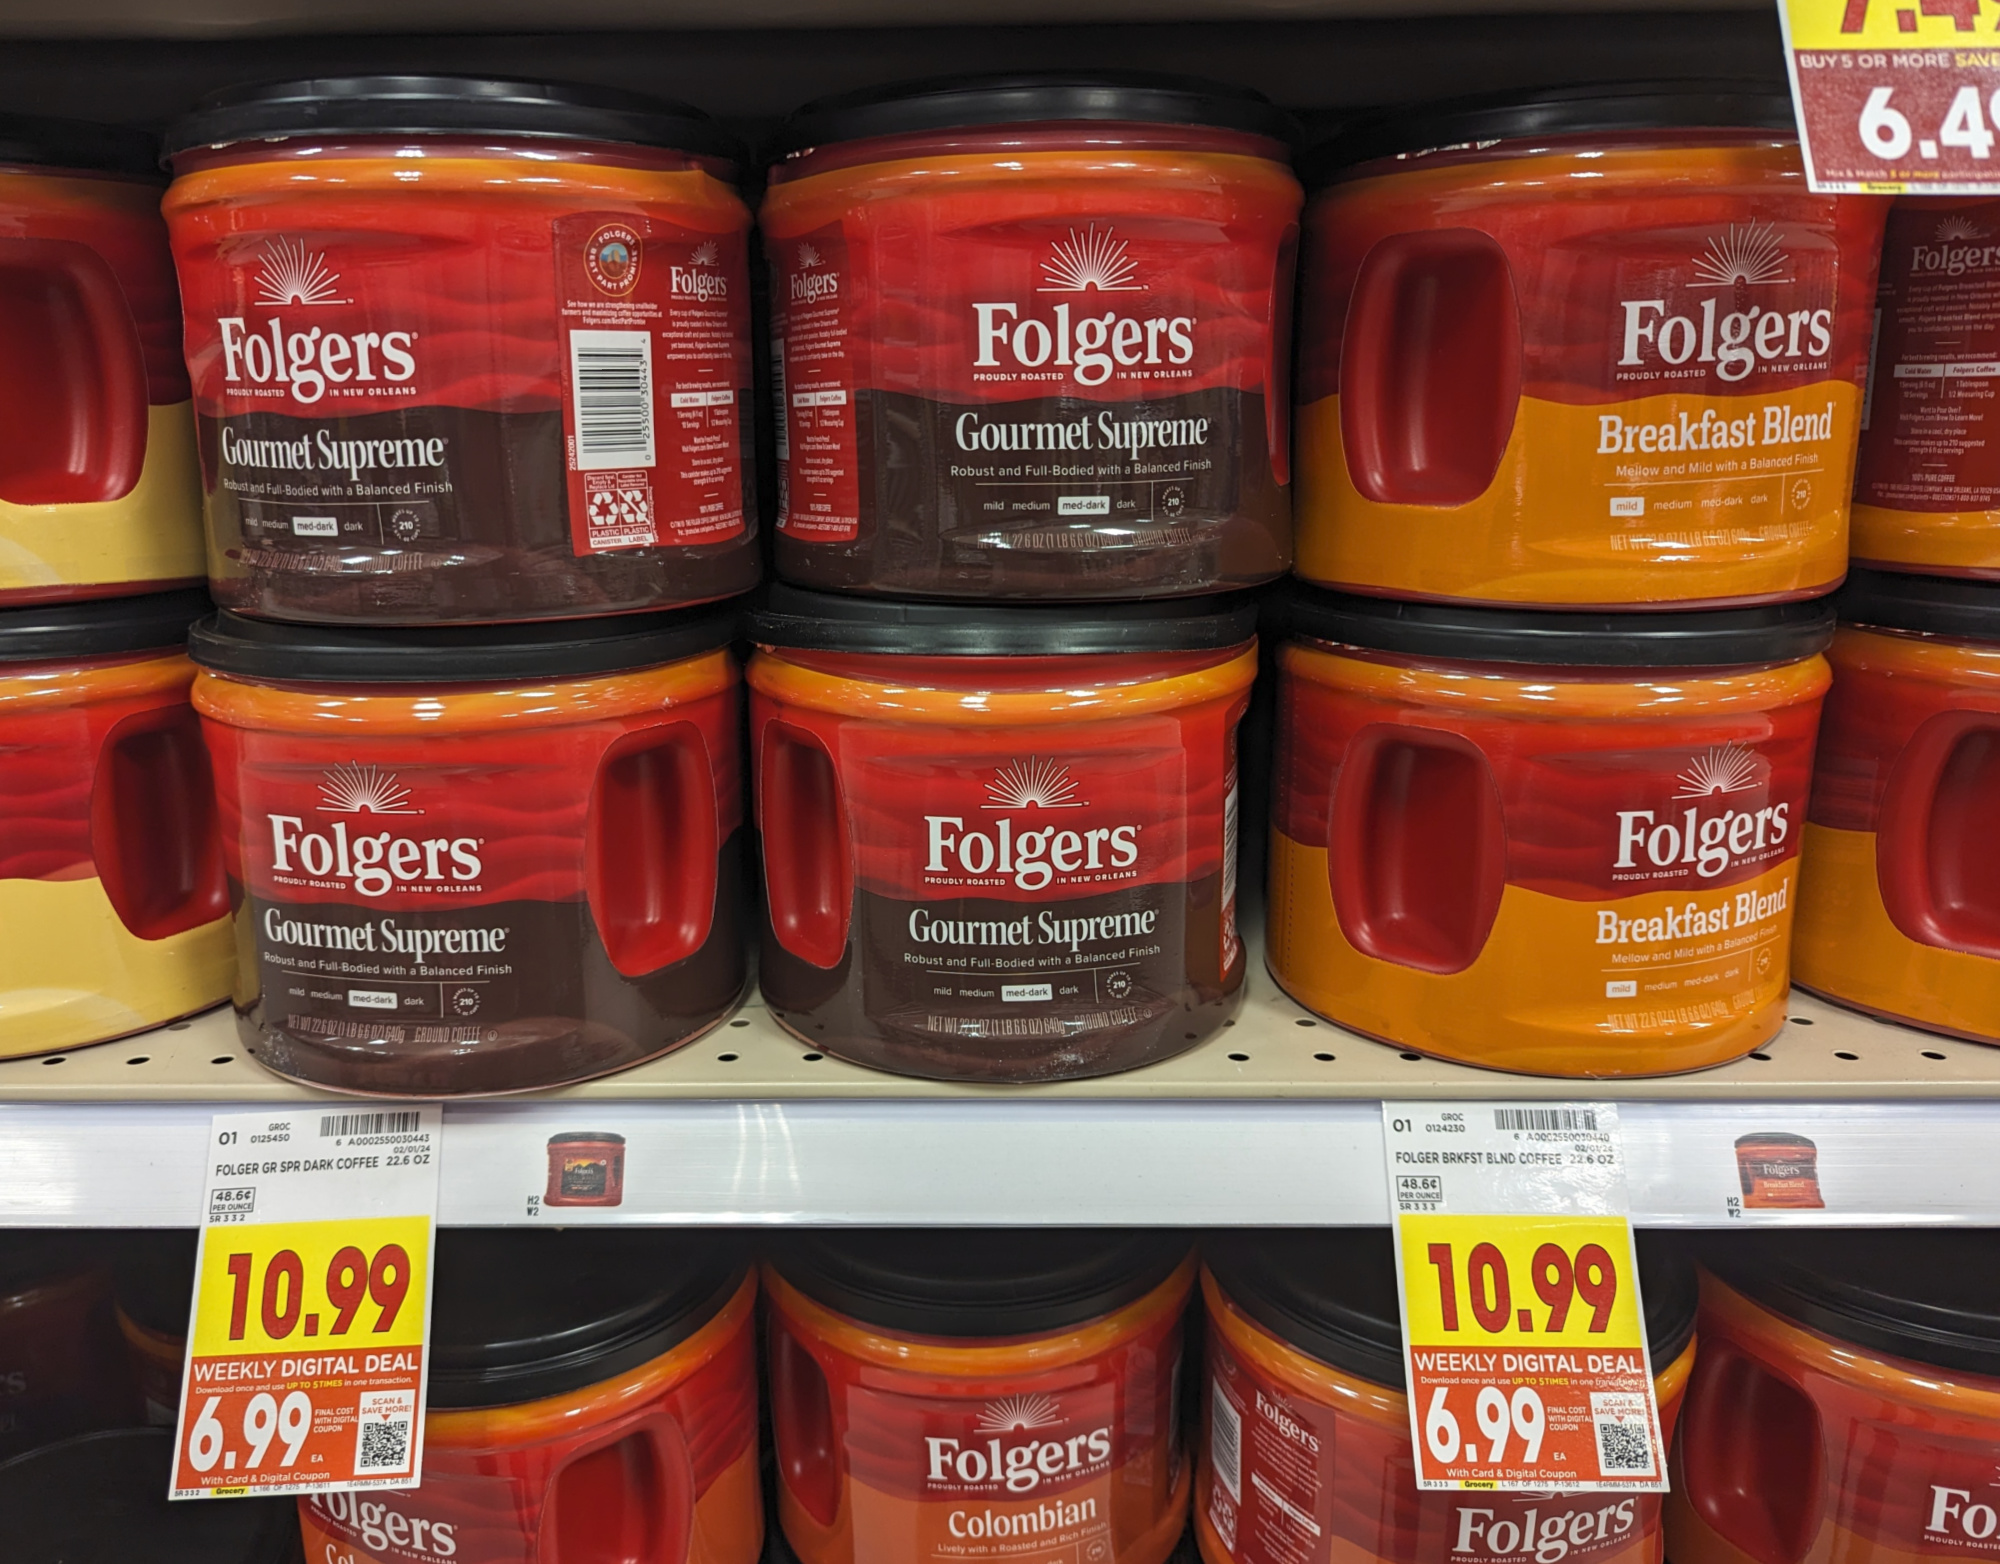 Big Tubs Of Folgers Ground Coffee Just $6.99 At Kroger